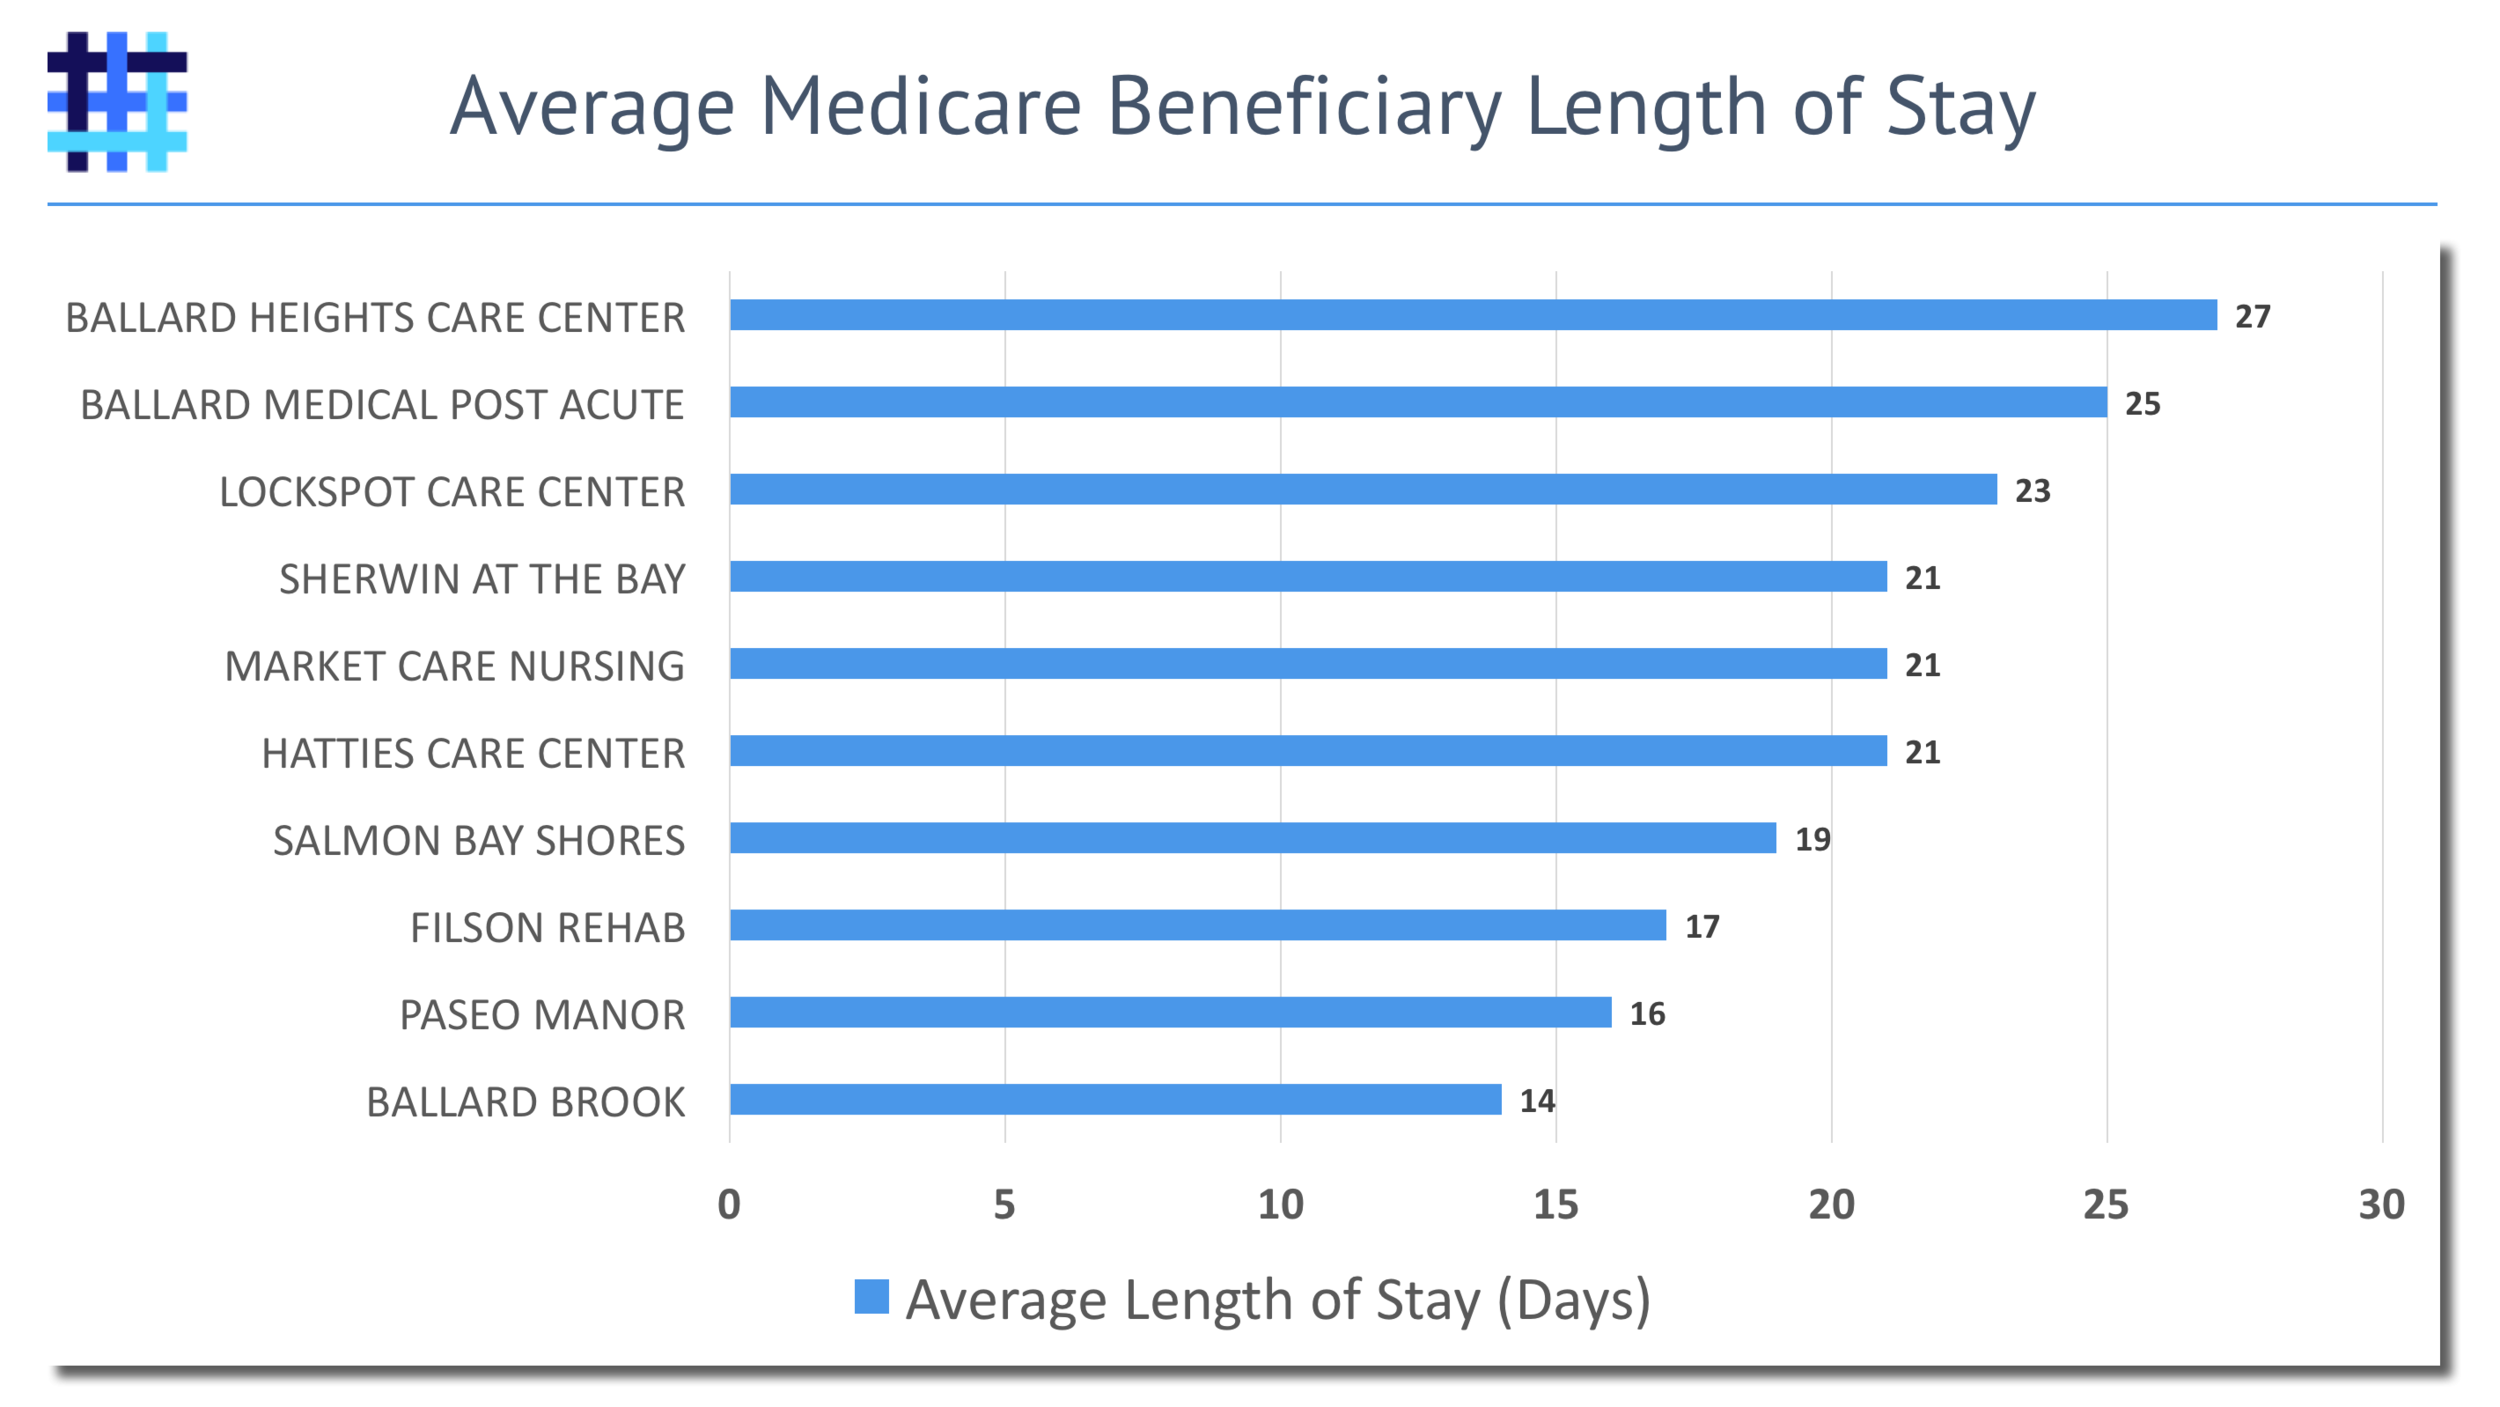 Nursing Home and Skilled Nursing Facility Average Length of Stay per Beneficiary